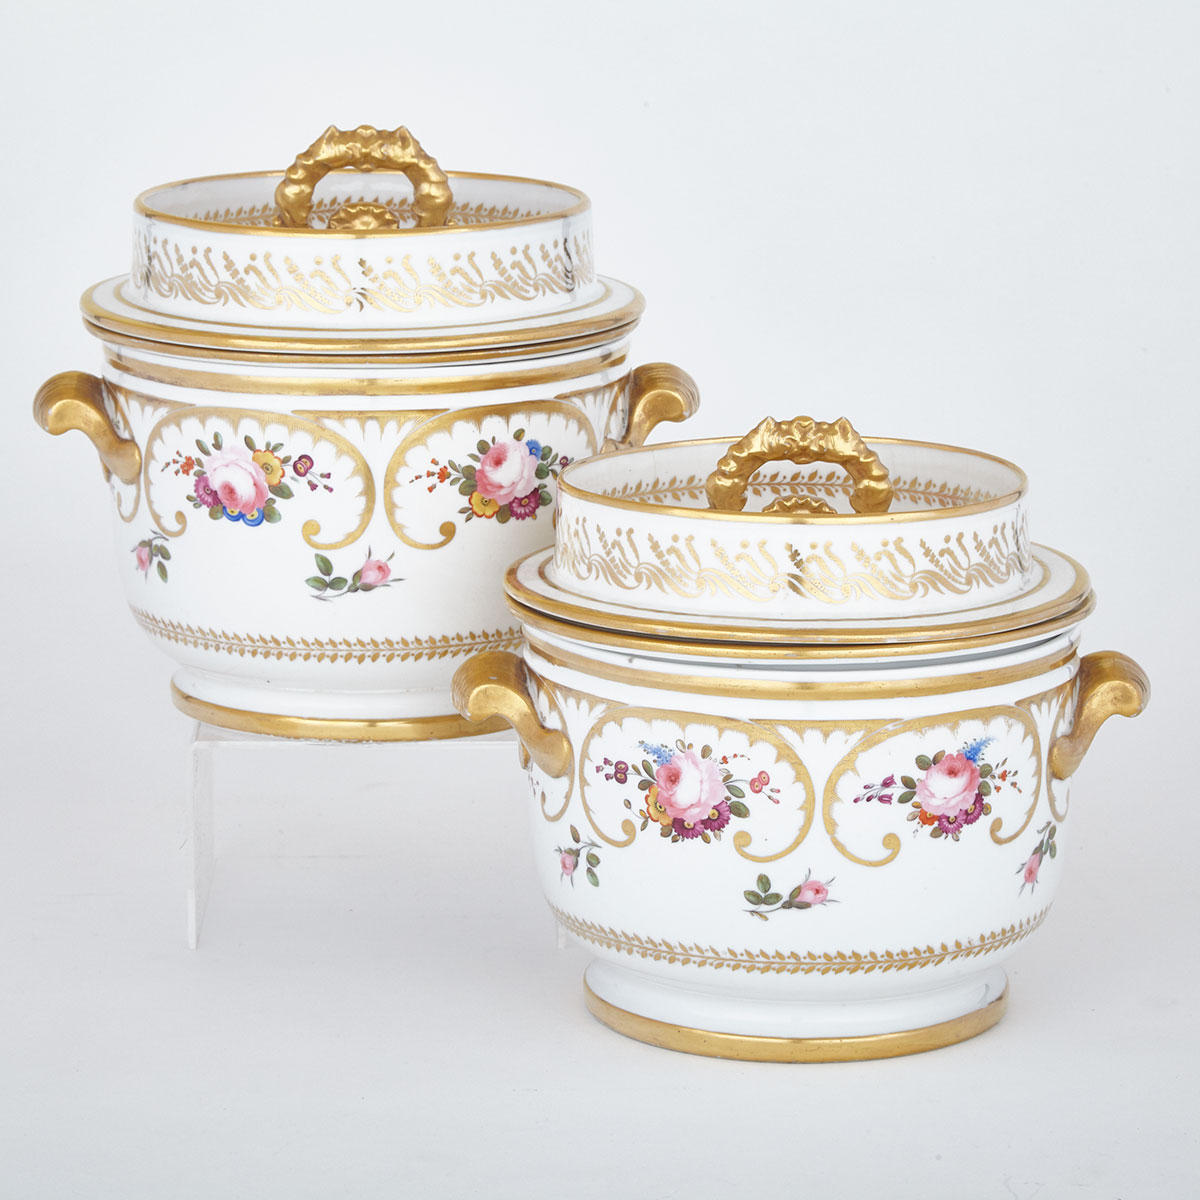 Pair of Chamberlains Worcester Fruit Coolers, c.1830